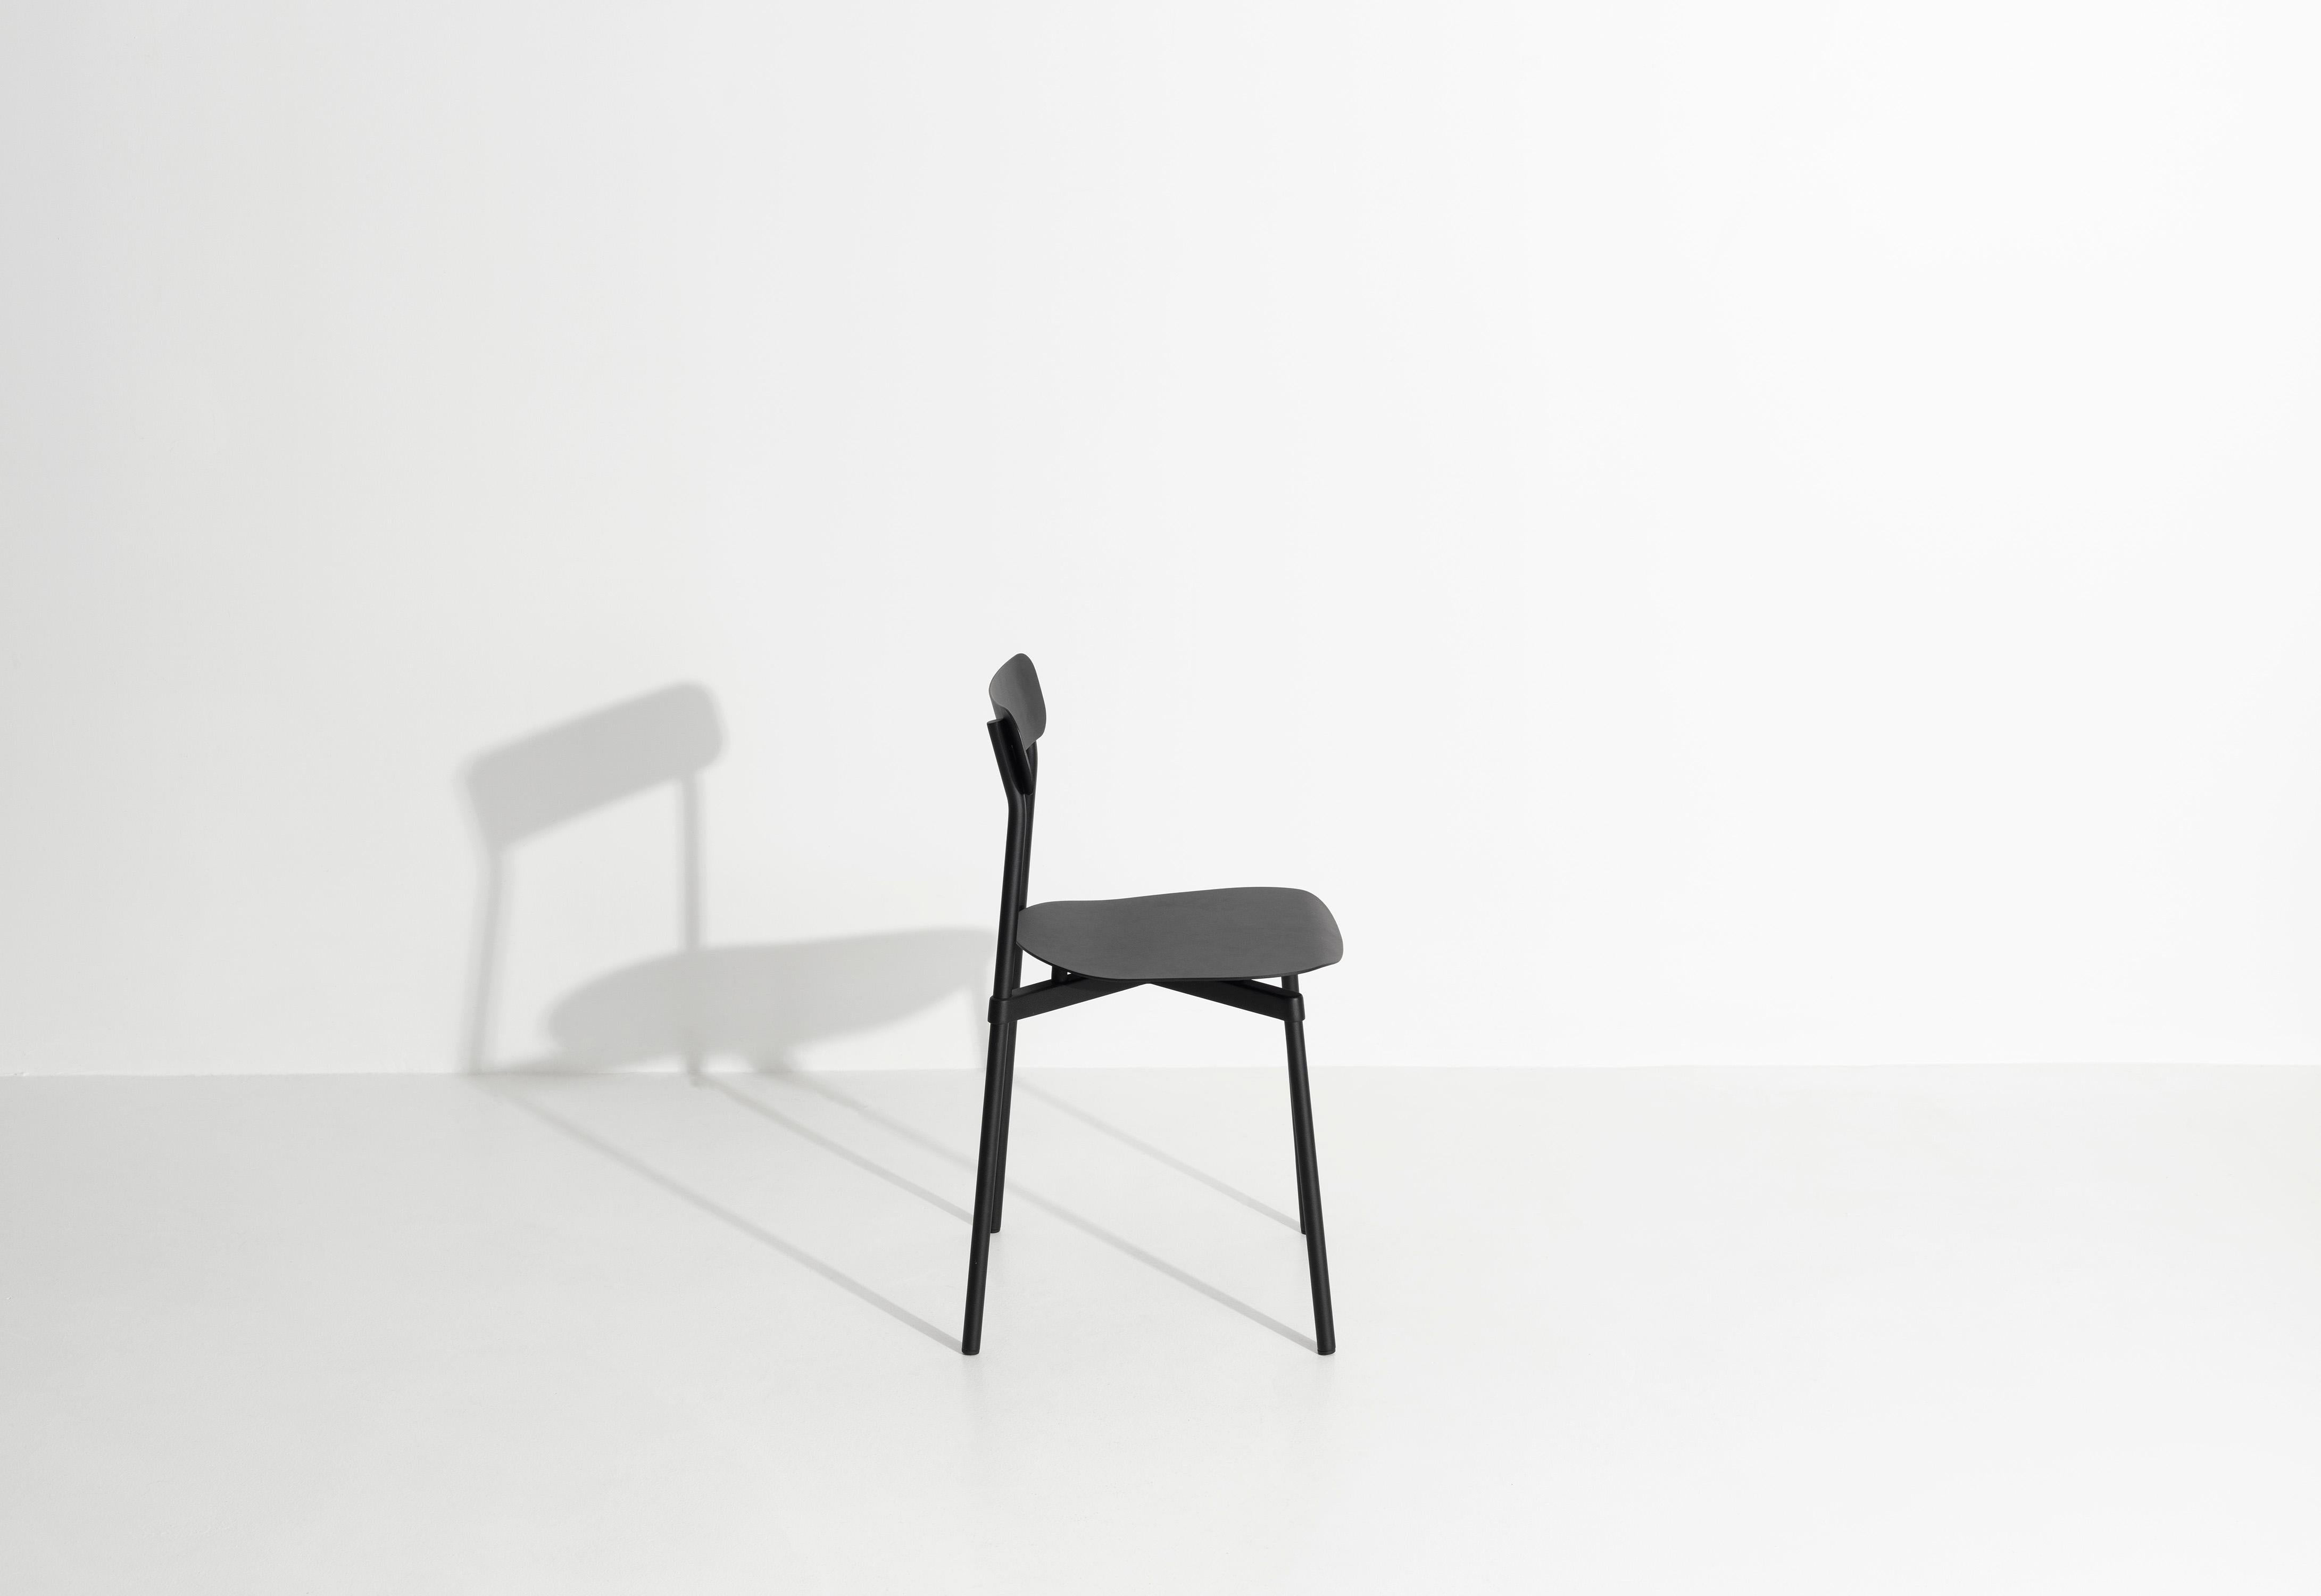 Contemporary Petite Friture Fromme Chair in Black Aluminium by Tom Chung, 2019 For Sale